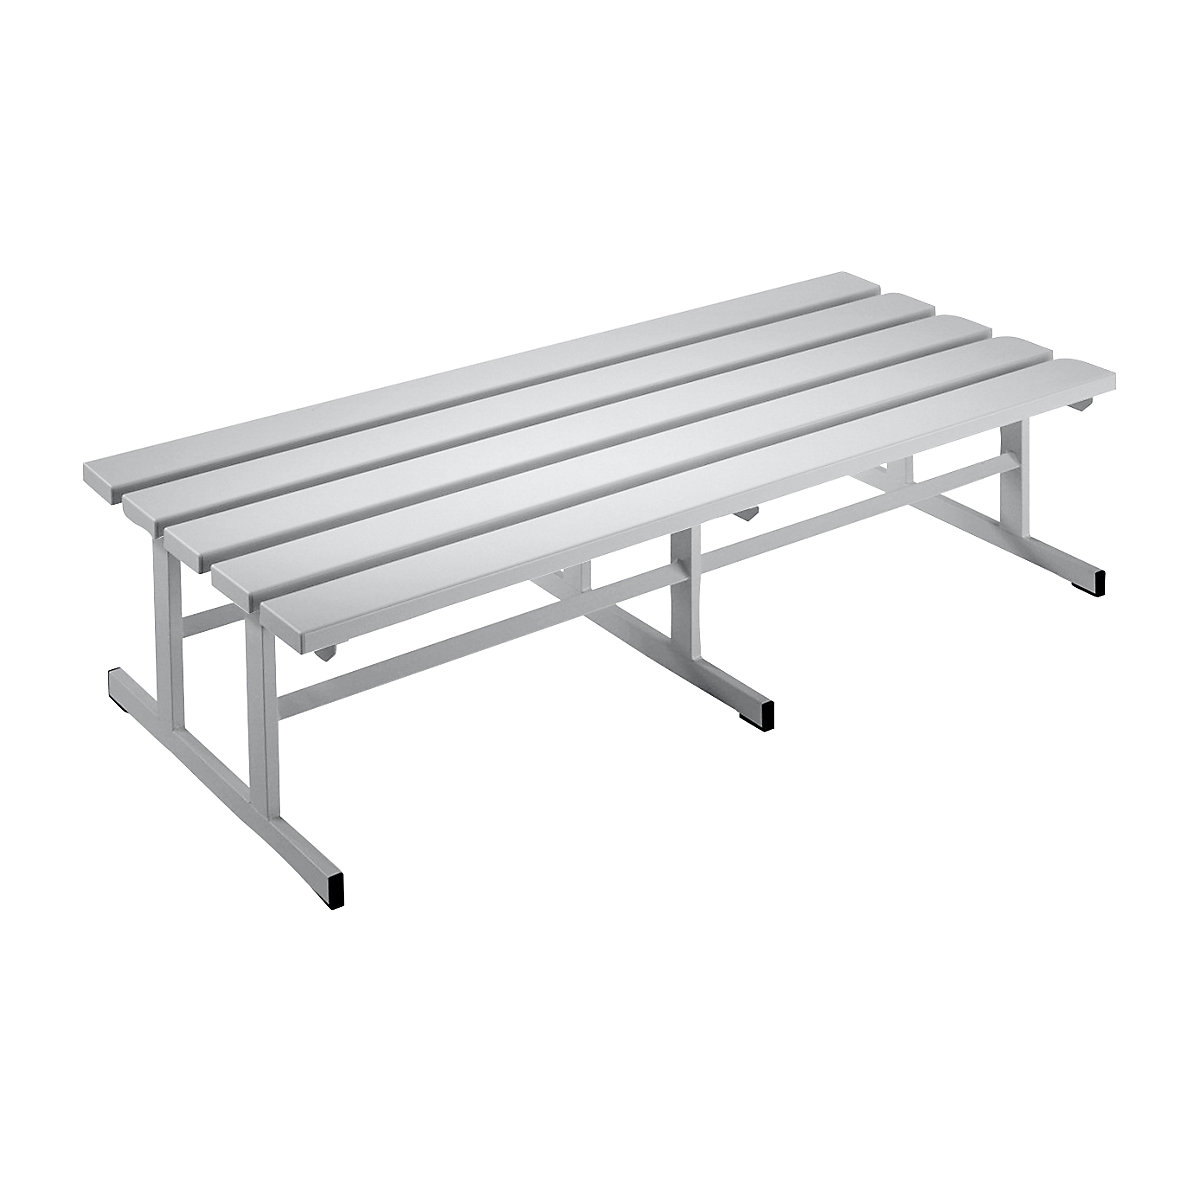 Wolf – Cloakroom bench, double sided seat, light grey, 1500 mm length